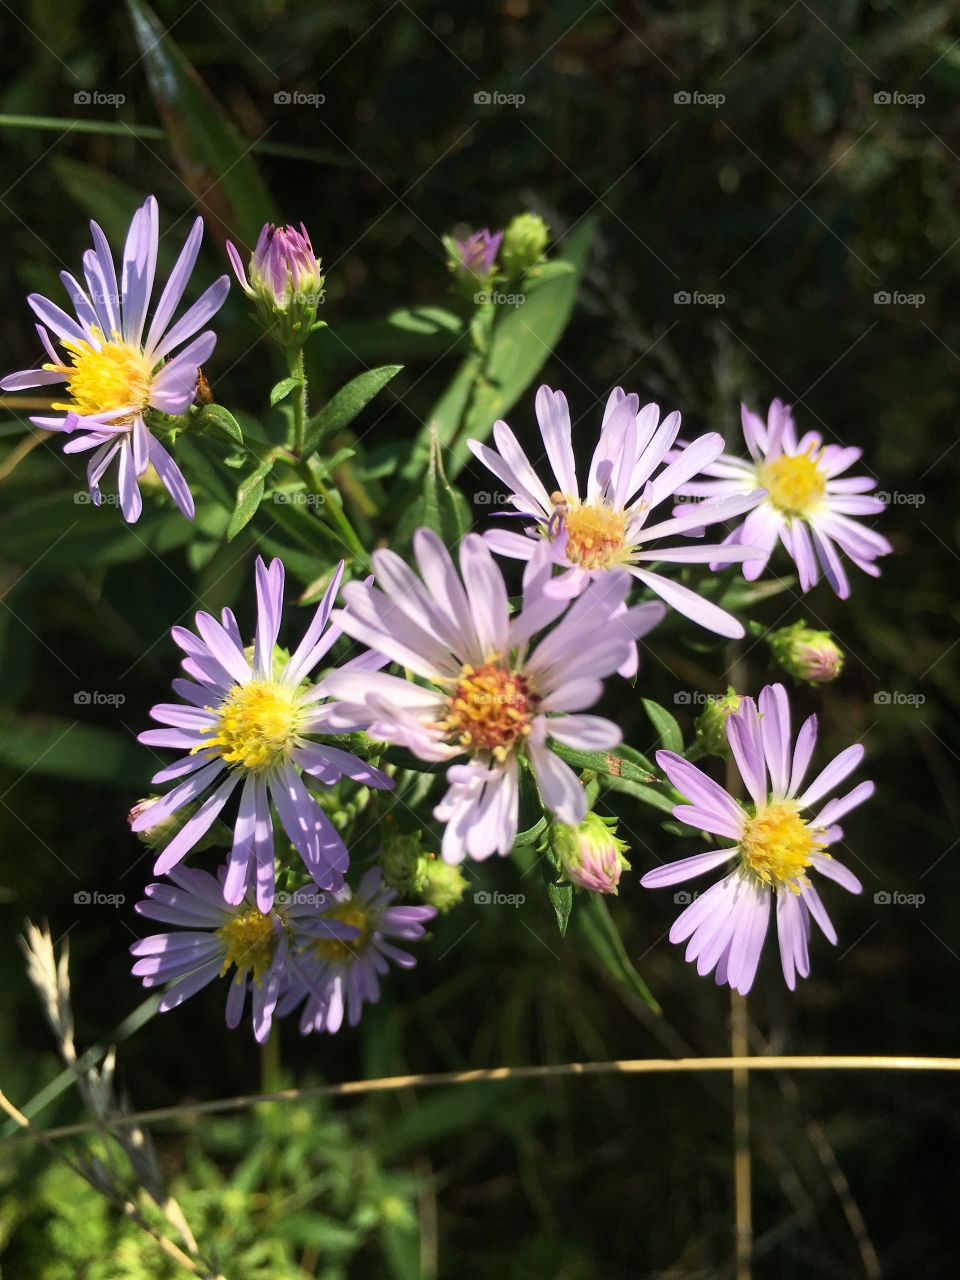 More wild asters